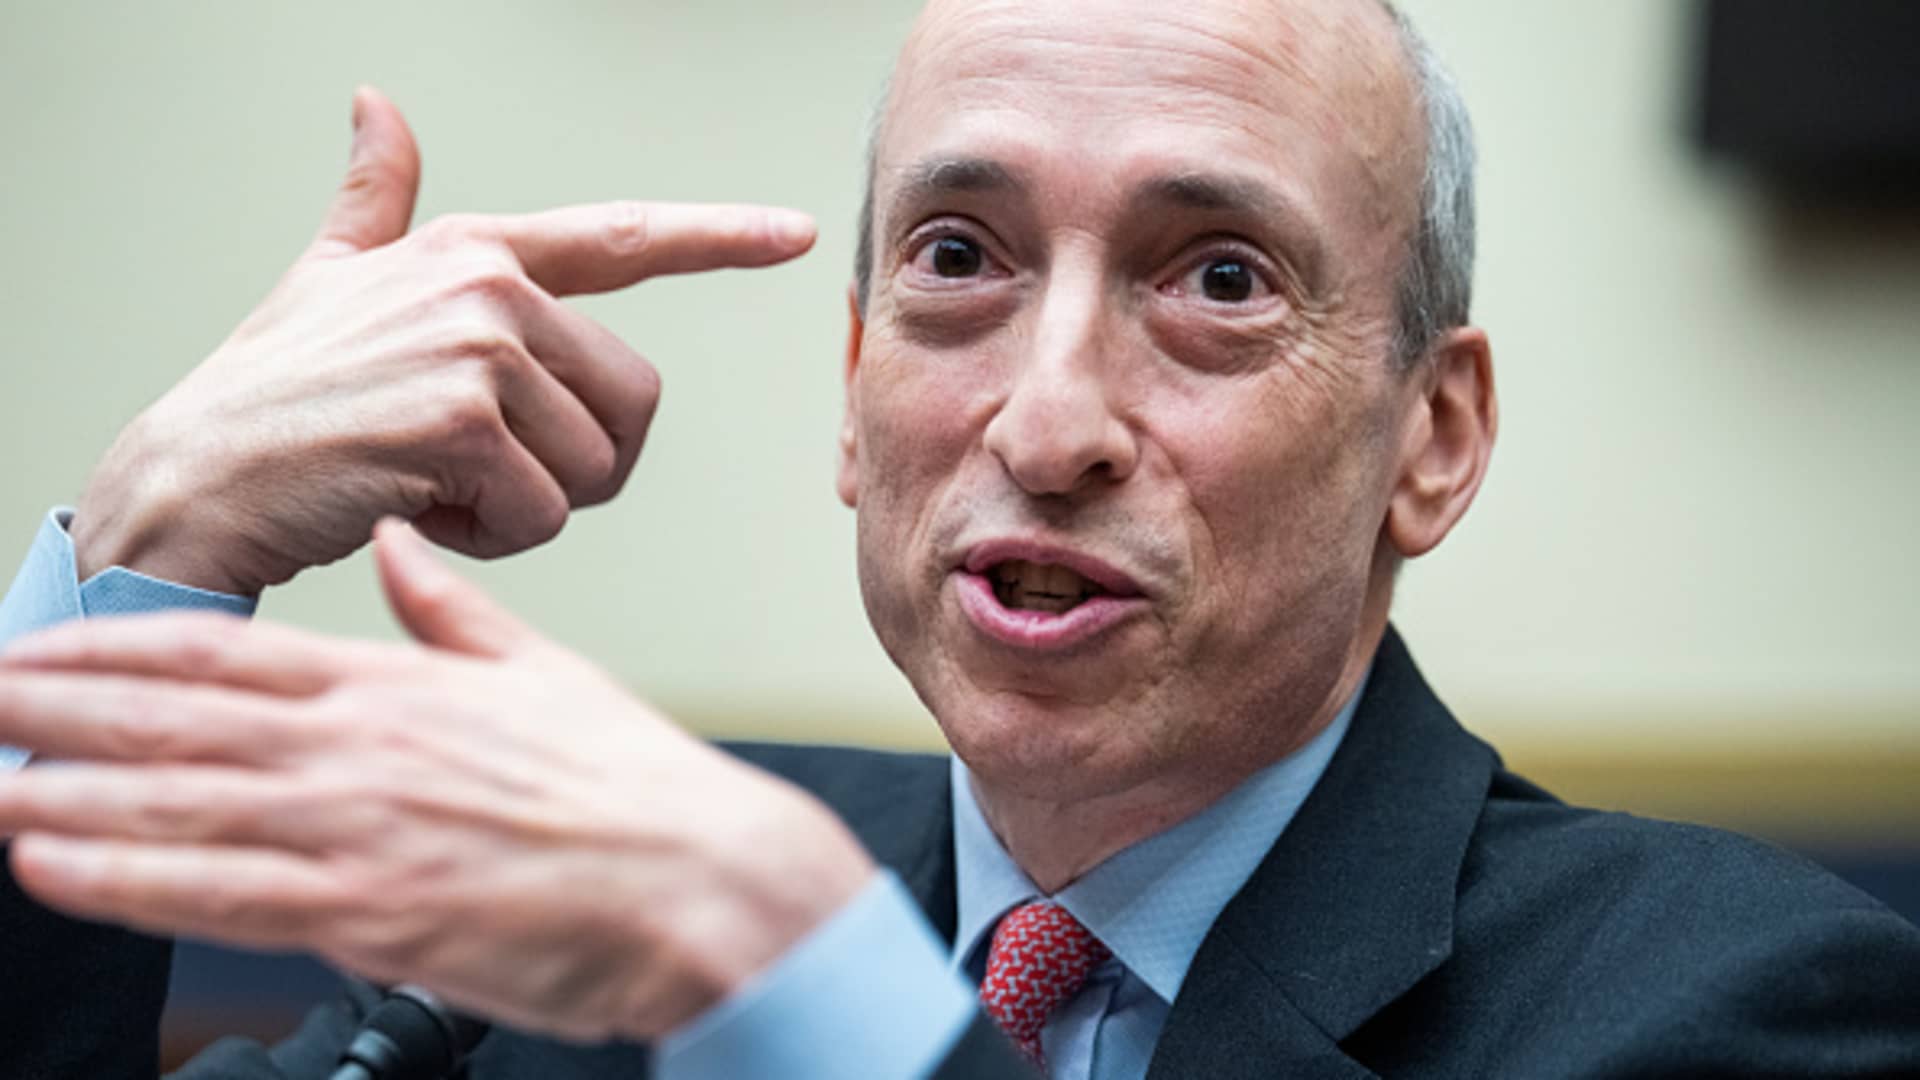 SEC's Gensler says rebooted FTX is possible if done 'within the law'